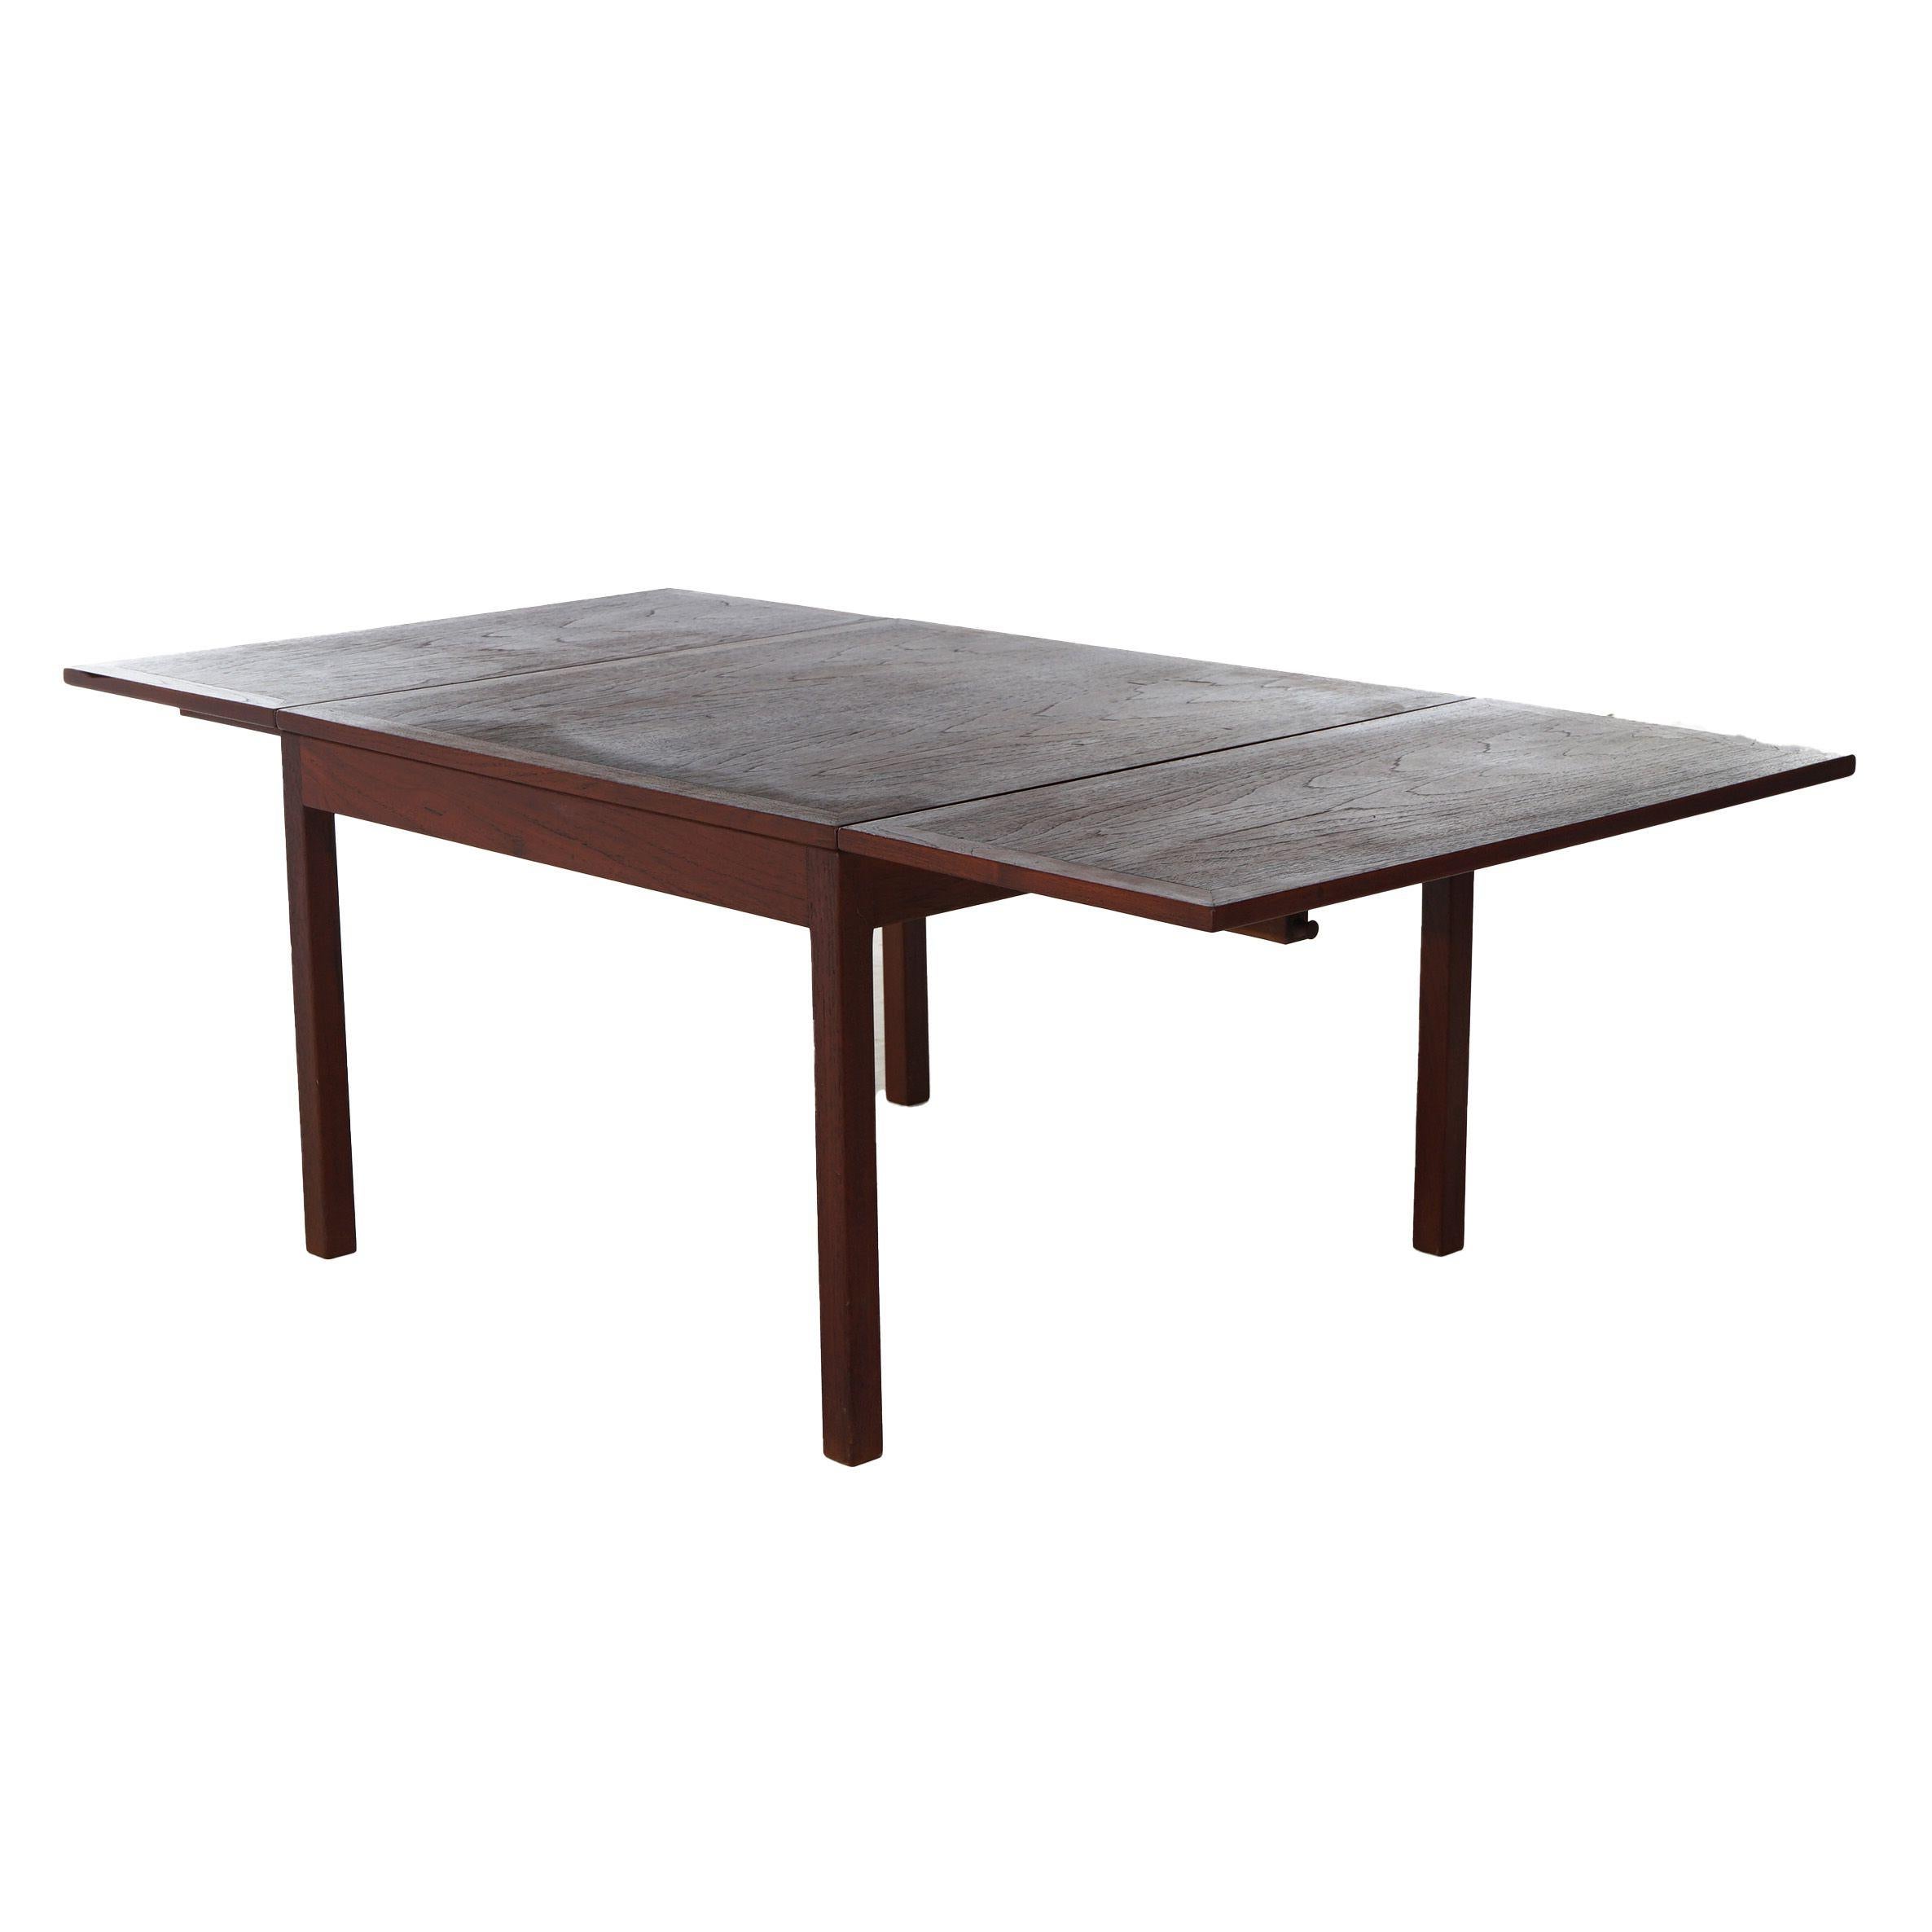 A Mid Century Danish Modern low table offers teak construction with drop leaves and raised on square straight legs, c1960

Measures - 21.25